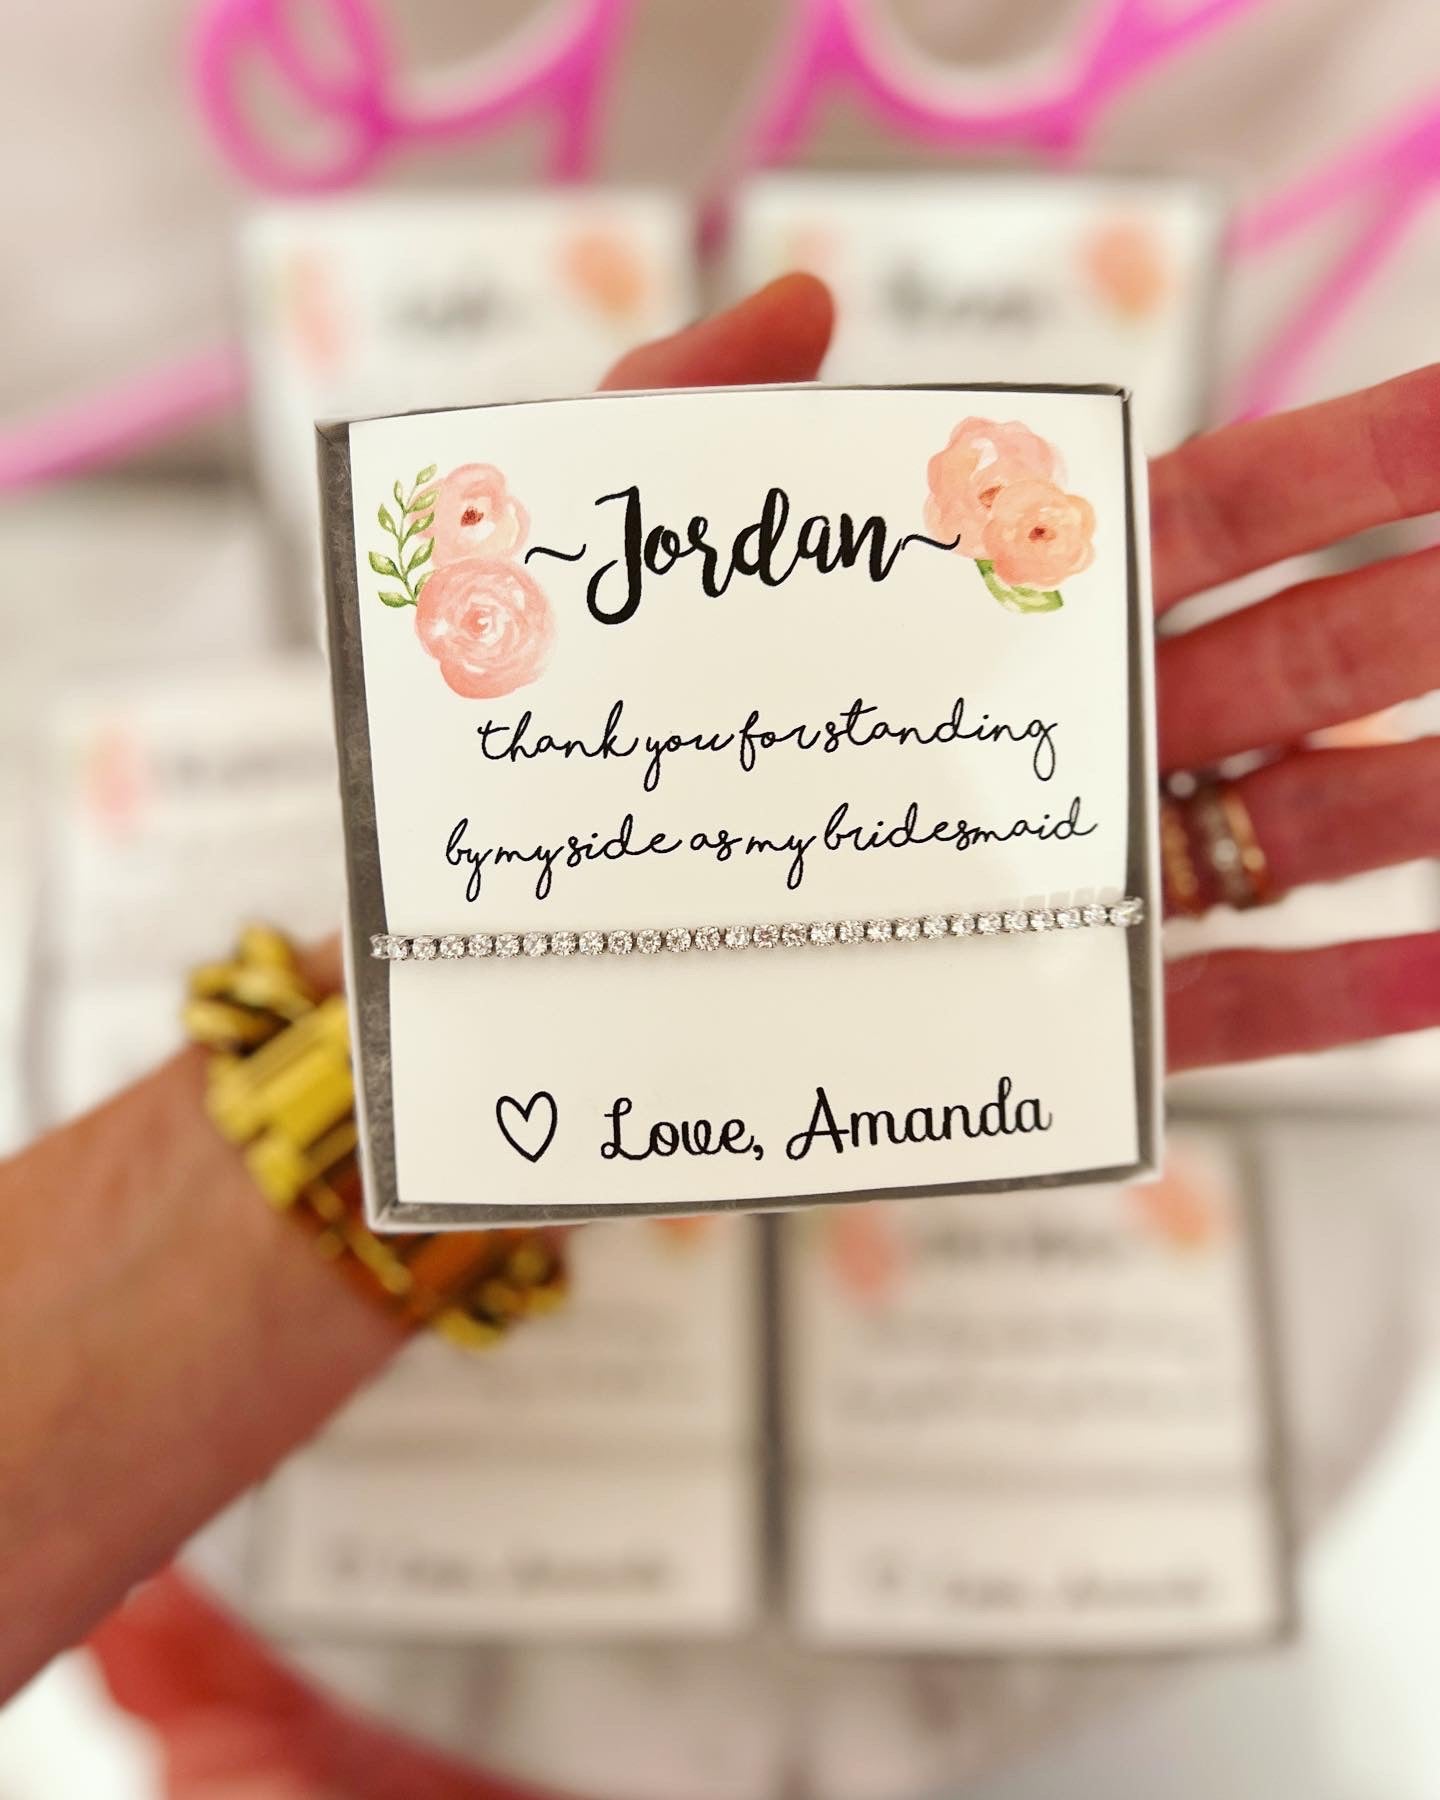 Today a bridesmaid, forever my friend bracelet!